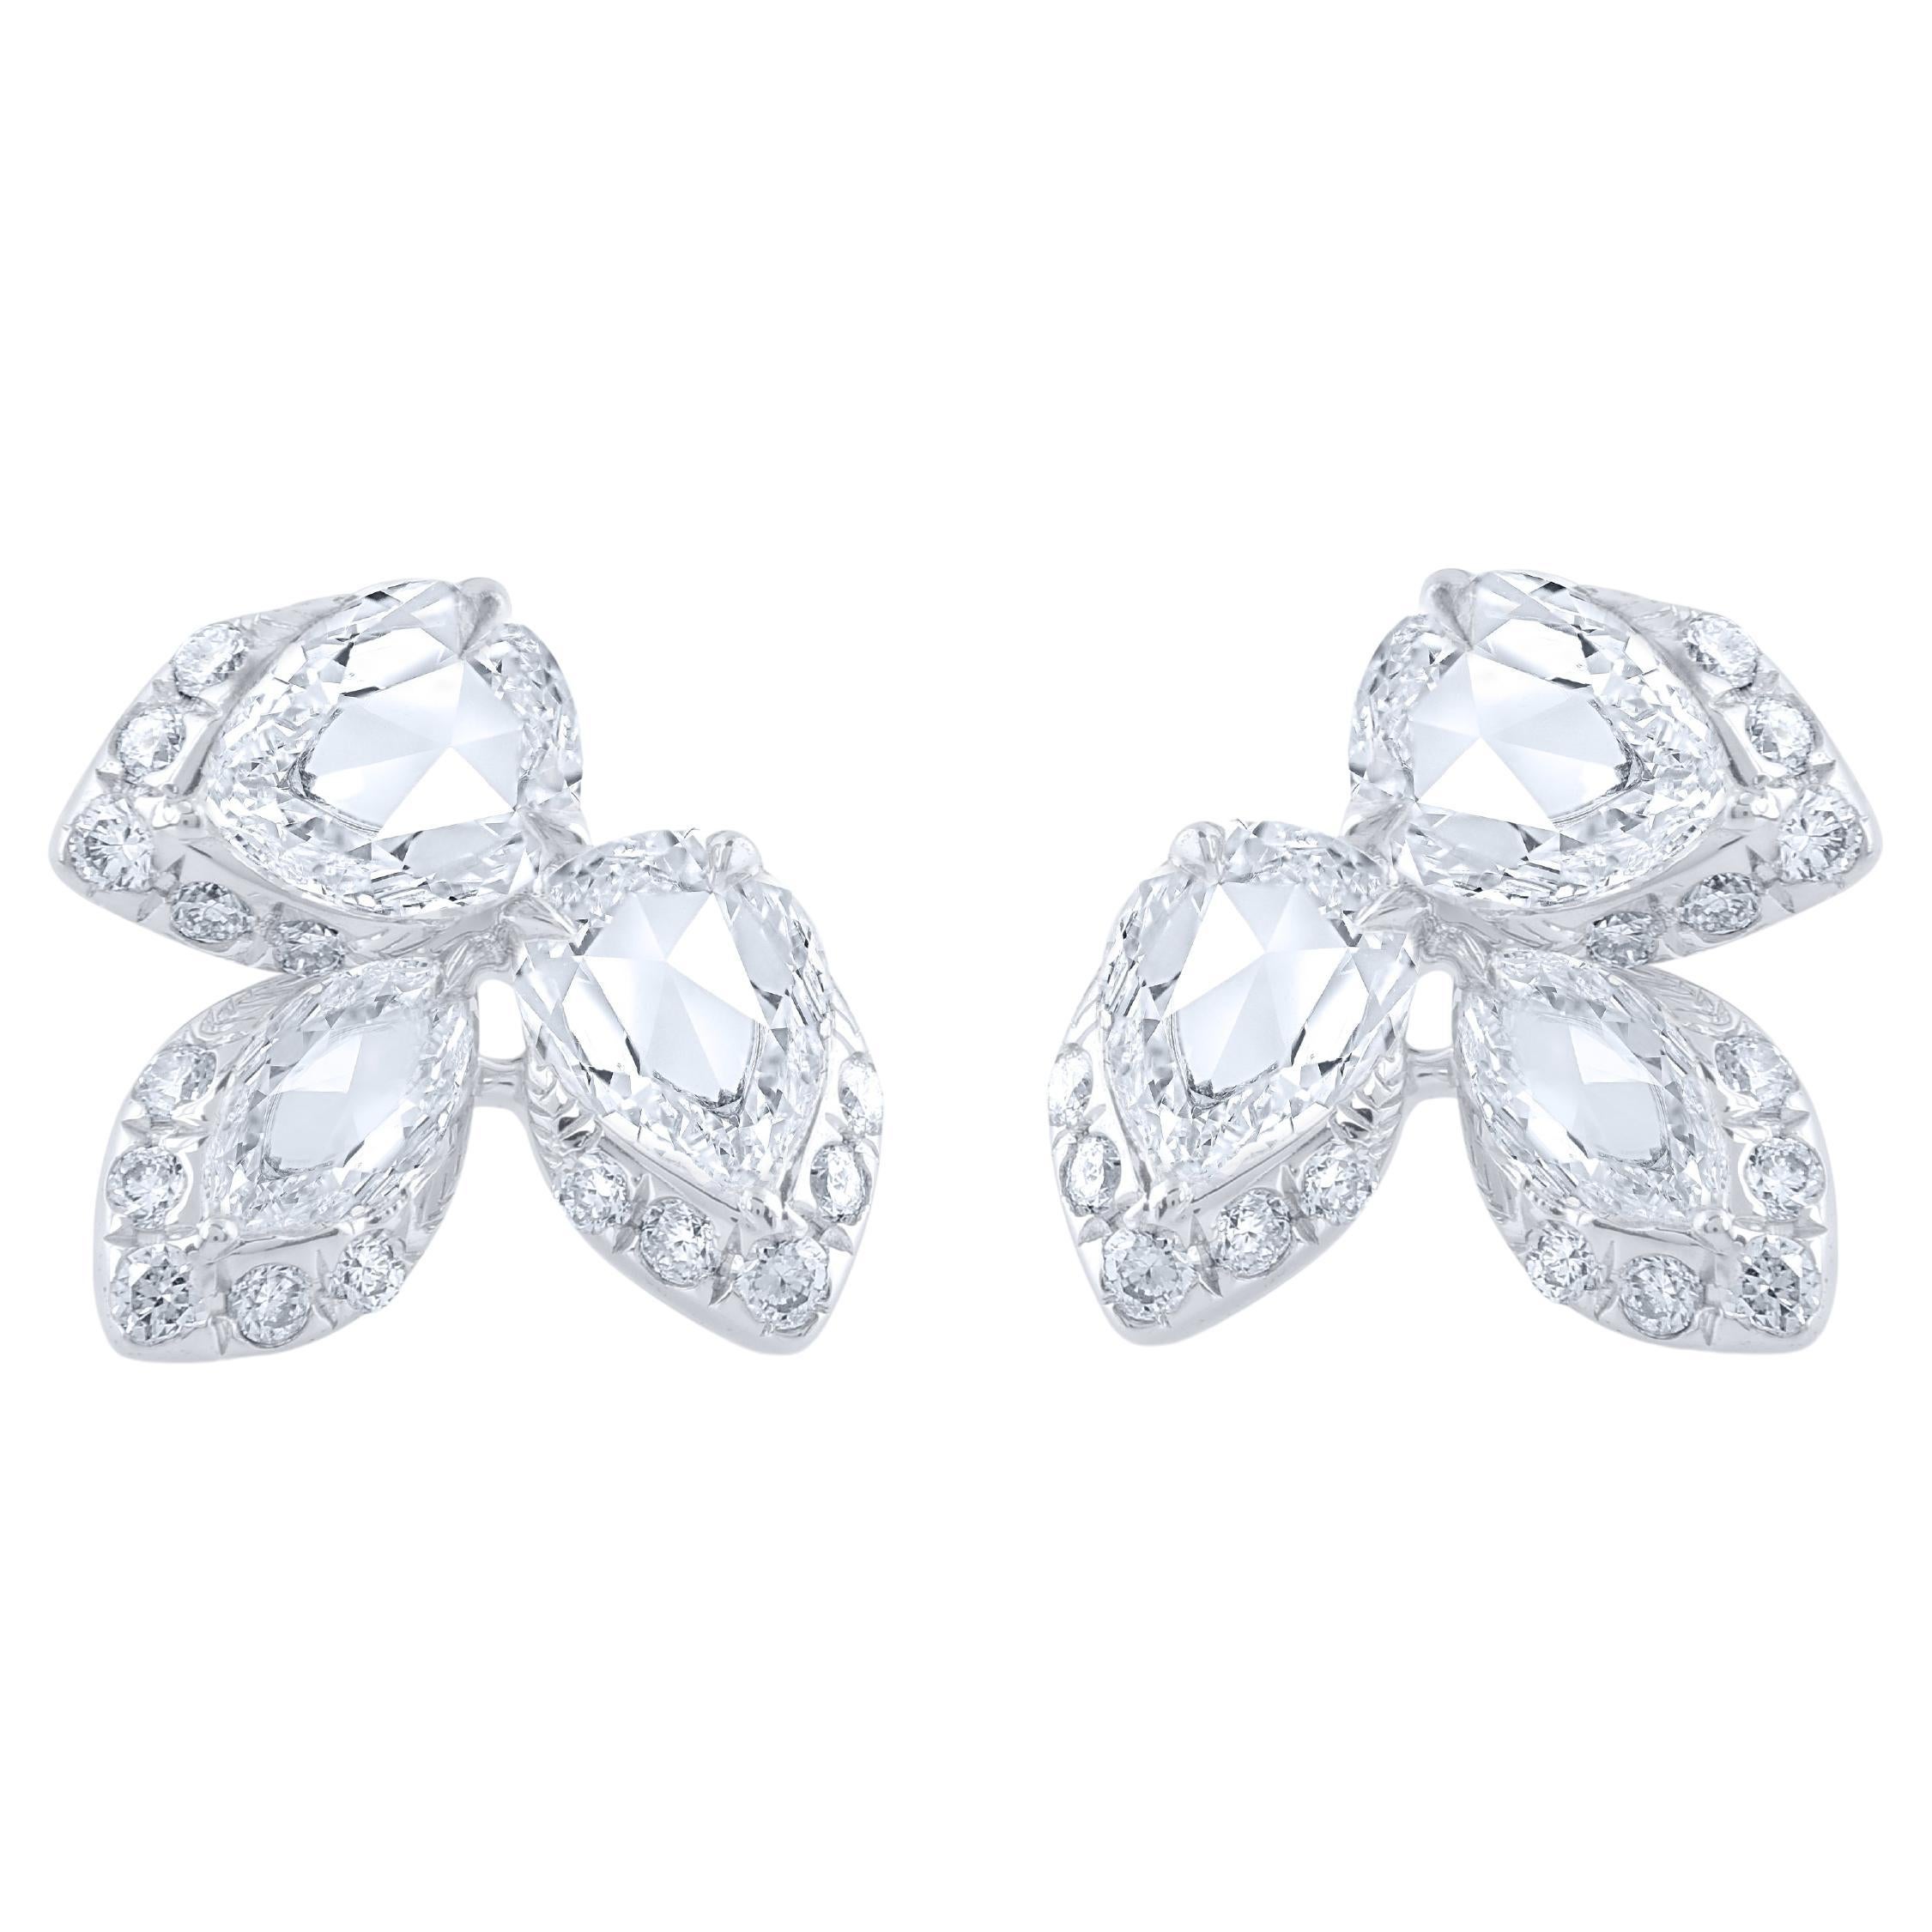 Harakh Rose Cut and Brilliant Colorless Diamond Studs in 18 Karat White Gold